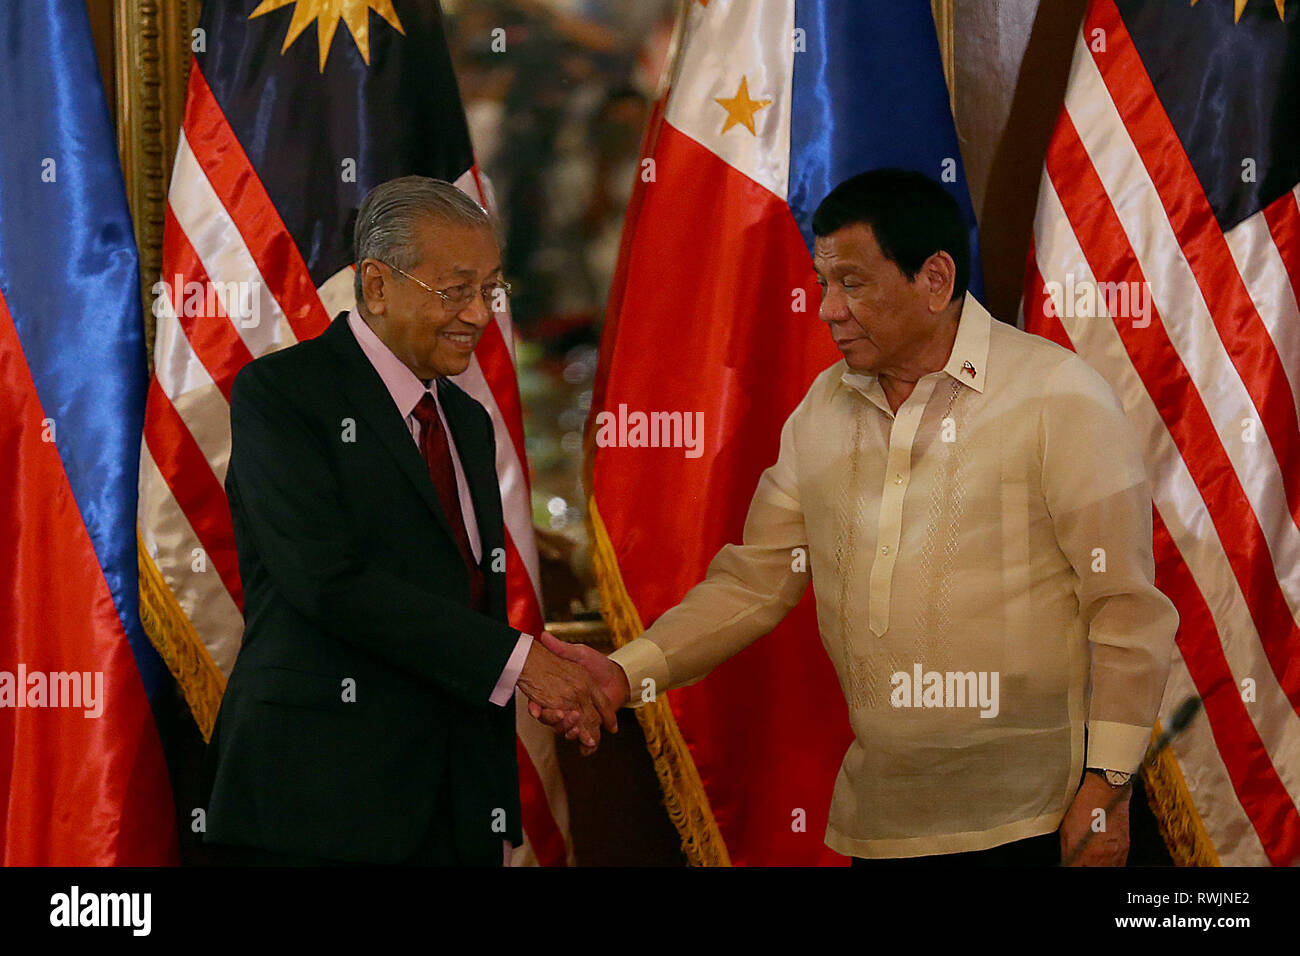 Manila, Philippines. 7th Mar, 2019. Visiting Malaysian Prime Minister Mahathir Mohamad (L) shakes hands with Philippine President Rodrigo Duterte during a welcoming ceremony at the Malacanang presidential palace in Manila, the Philippines, March 7, 2019. Credit: Rouelle Umali/Xinhua/Alamy Live News Stock Photo